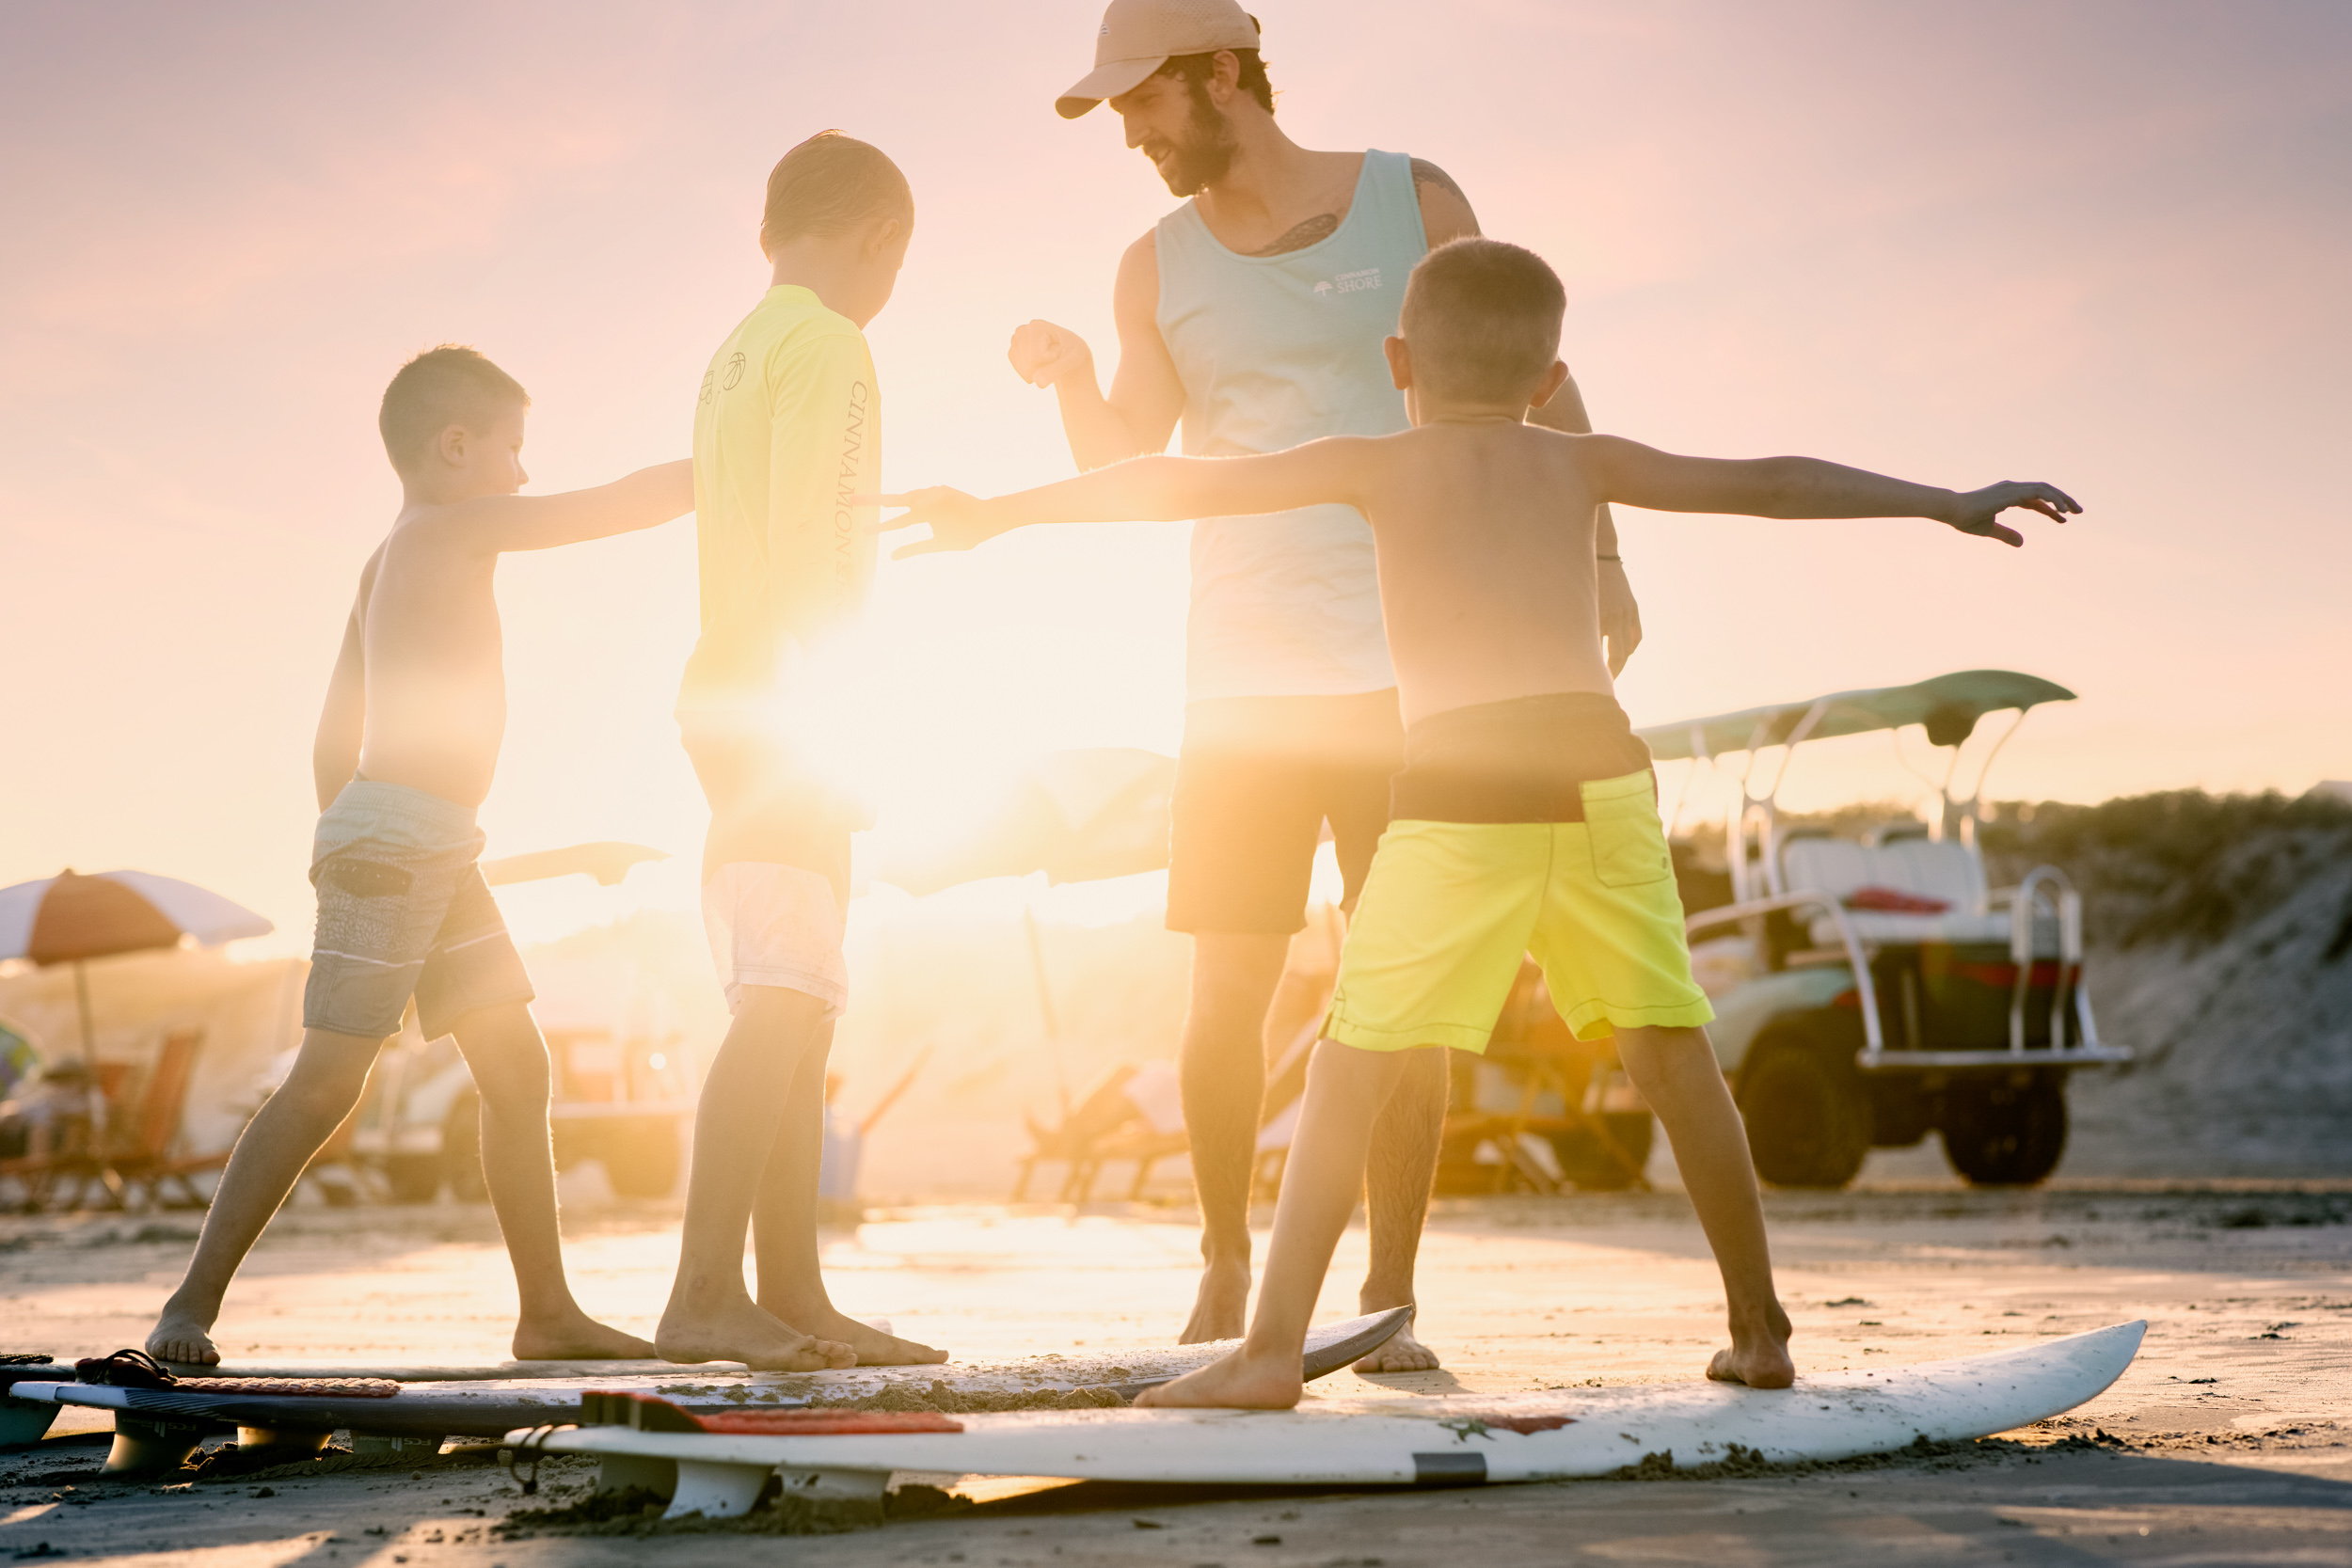 surf instructor fist bumping students at sunset in port aransas